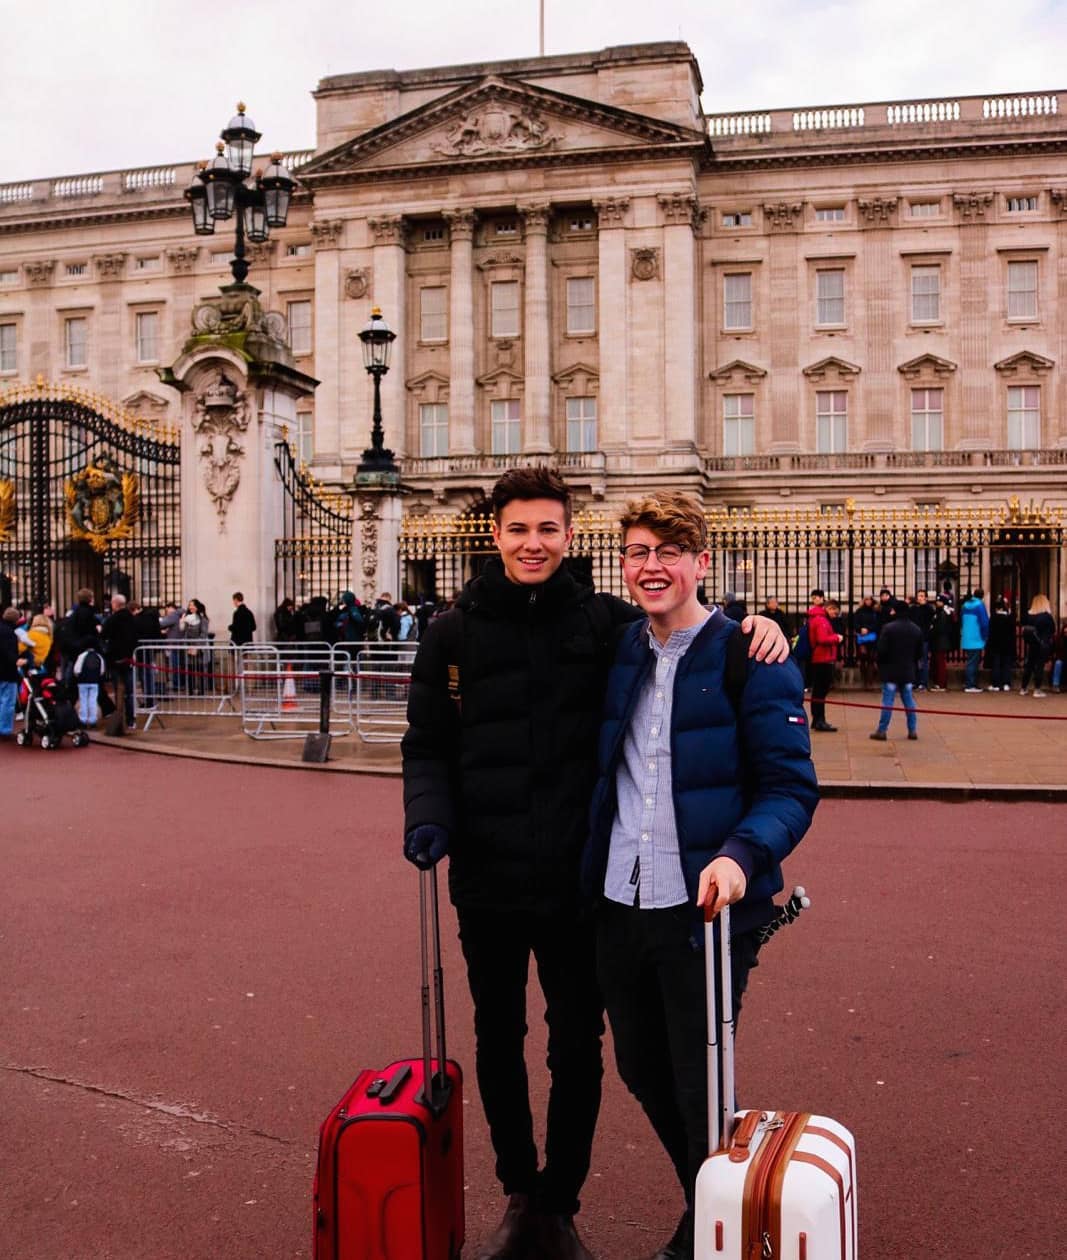 Andrew McLaughlin and Jeremy Miles in front of Buckingham Palace